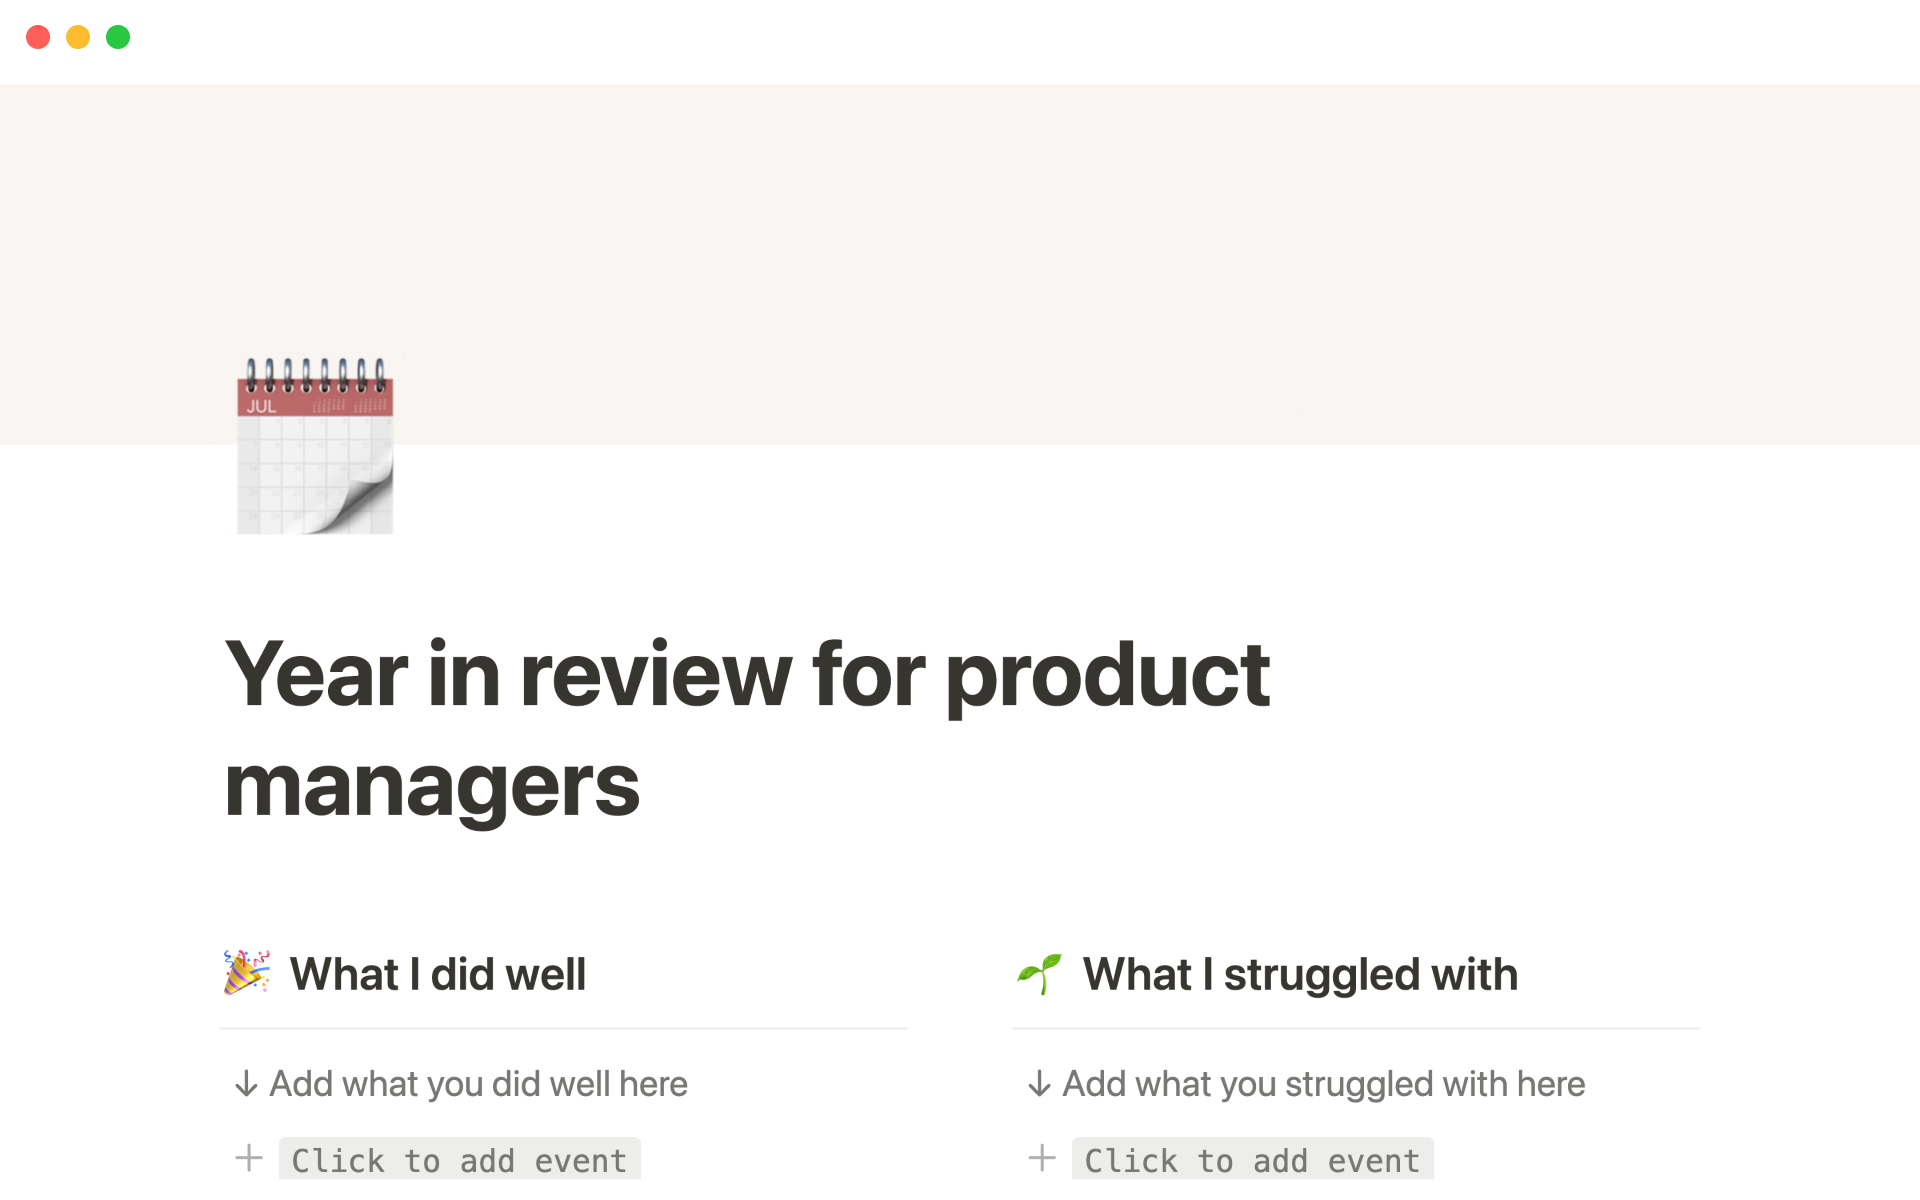 The desktop image for the Year in review for product managers template